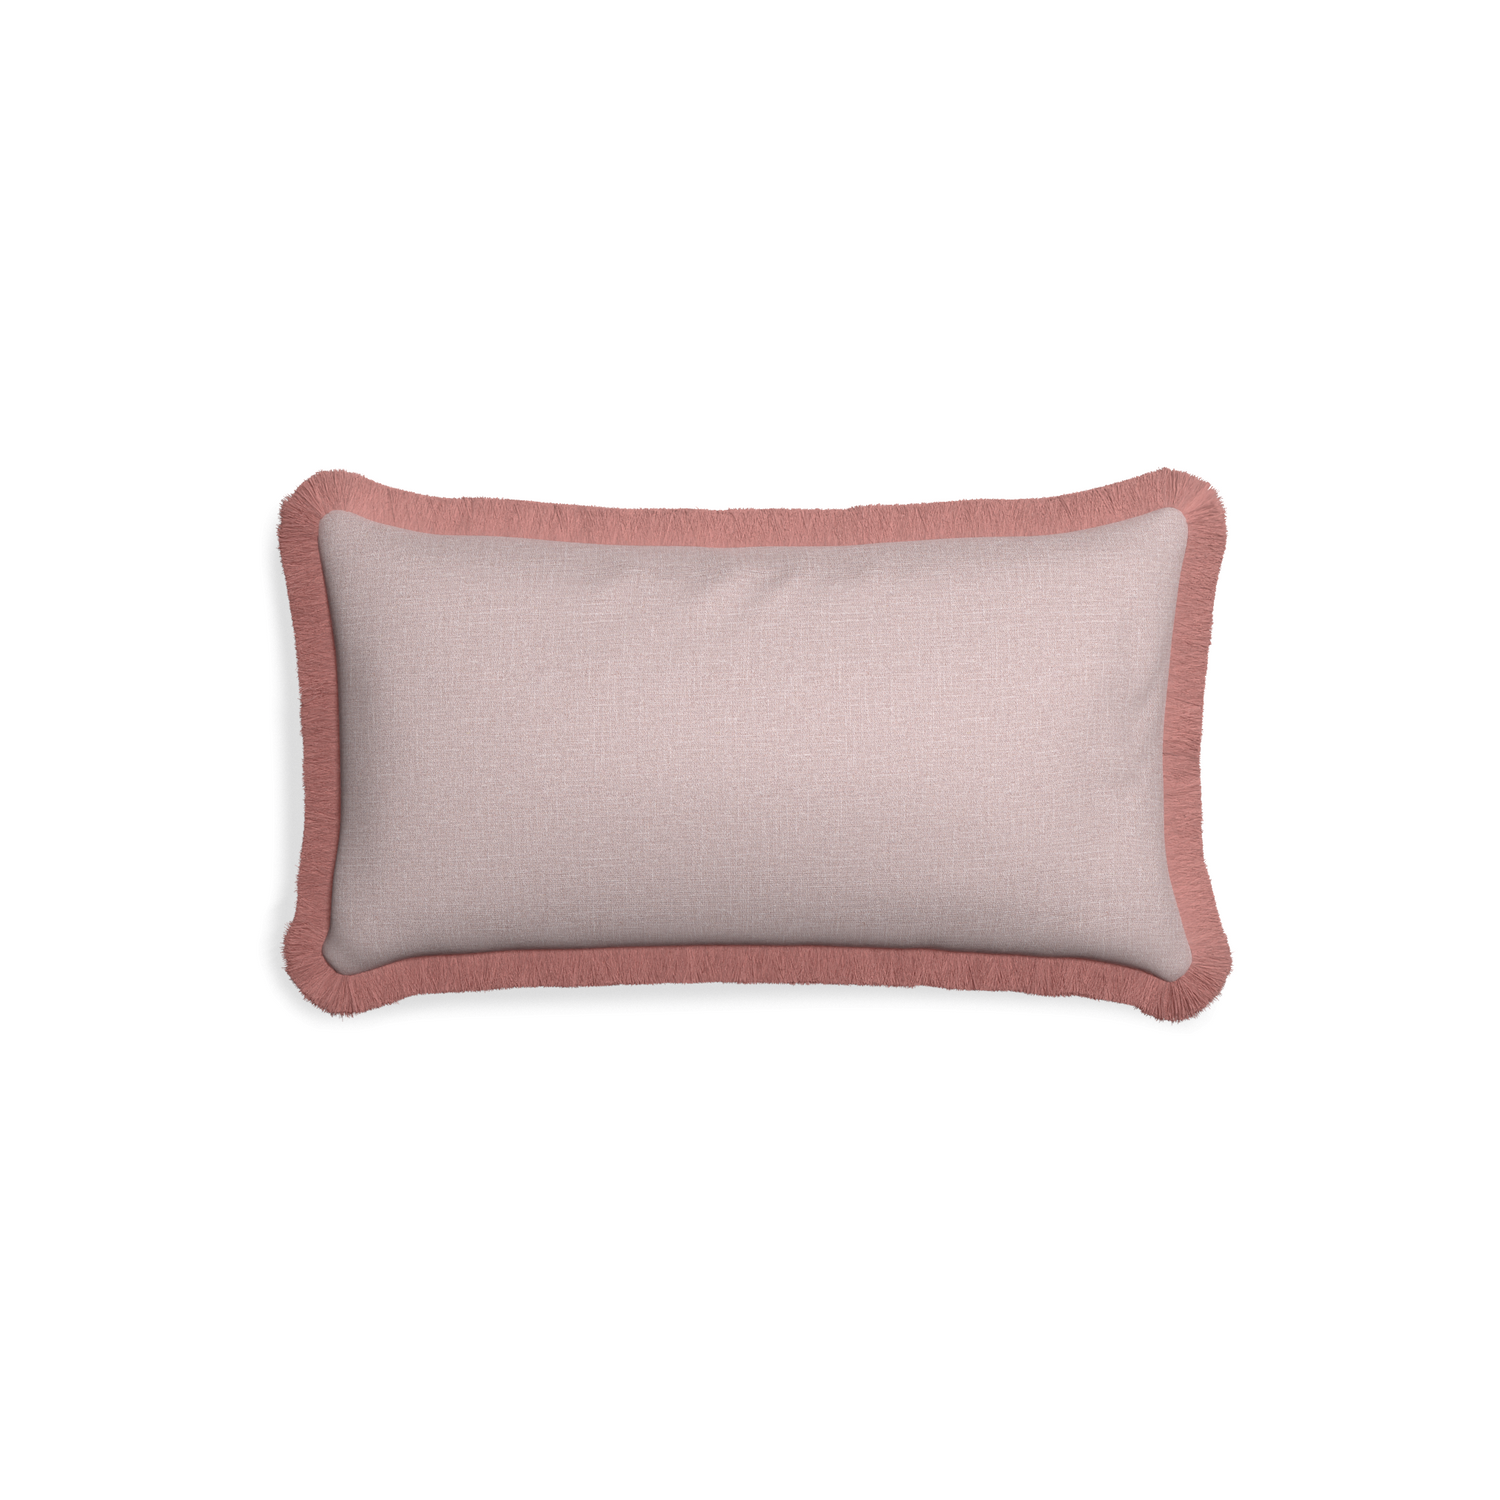 Petite-lumbar orchid custom mauve pinkpillow with d fringe on white background